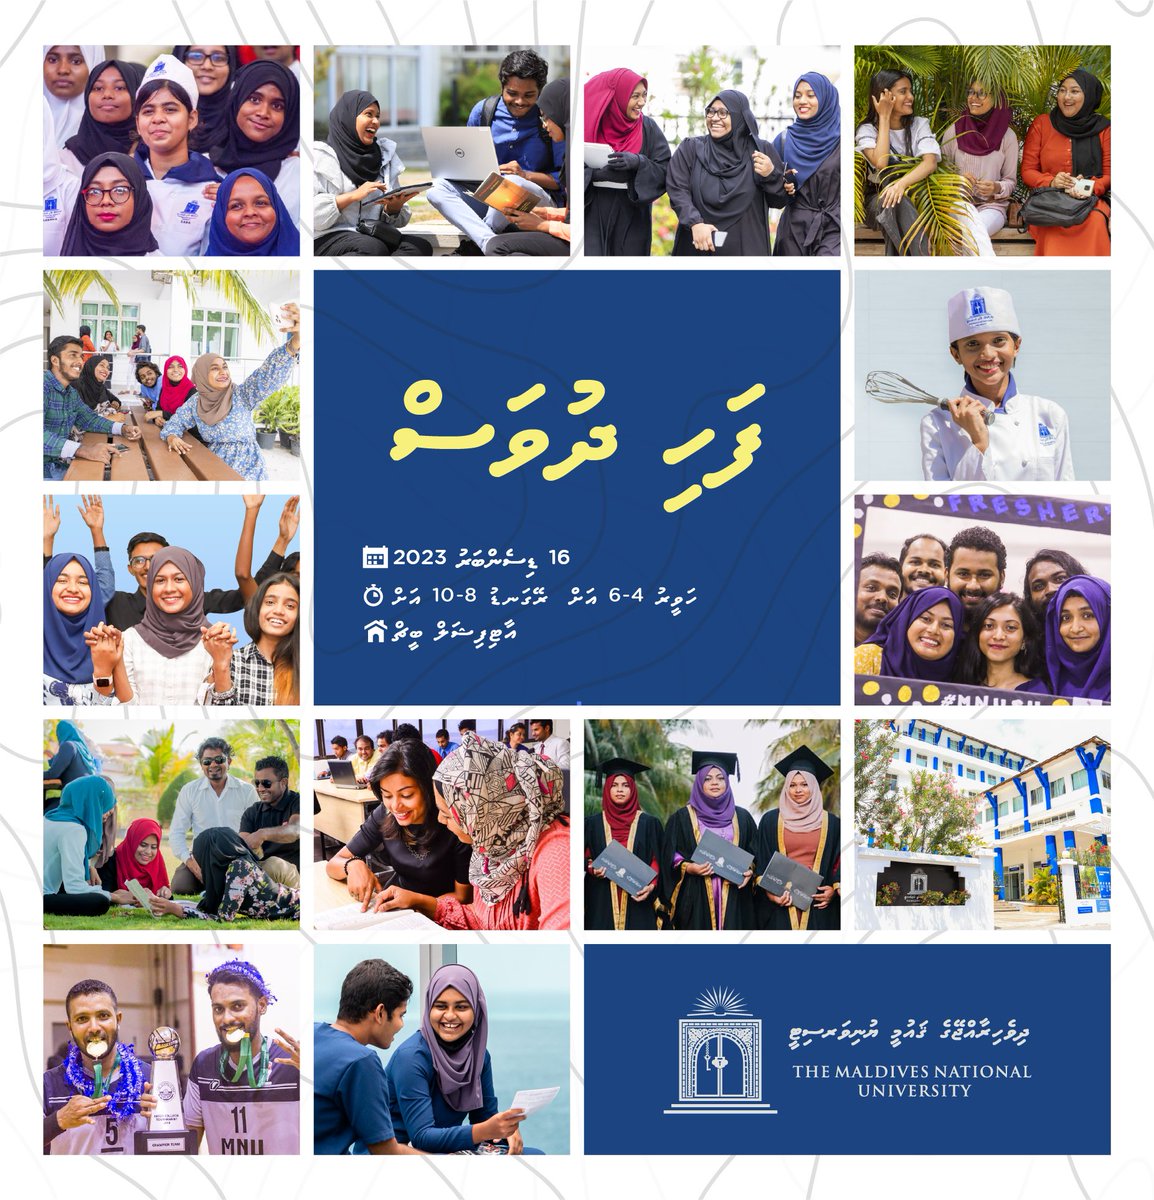 MNU Fahi Dhuvas ( Open Day)

Join us on 16th of December 2023 between 4PM - 6PM and 8PM - 10PM at Artificial Beach to find out more about our courses, facilities, study options, and more.

#MNU #FahiDhuvas #Februaryintake2024 #NationBuilding #Since1973